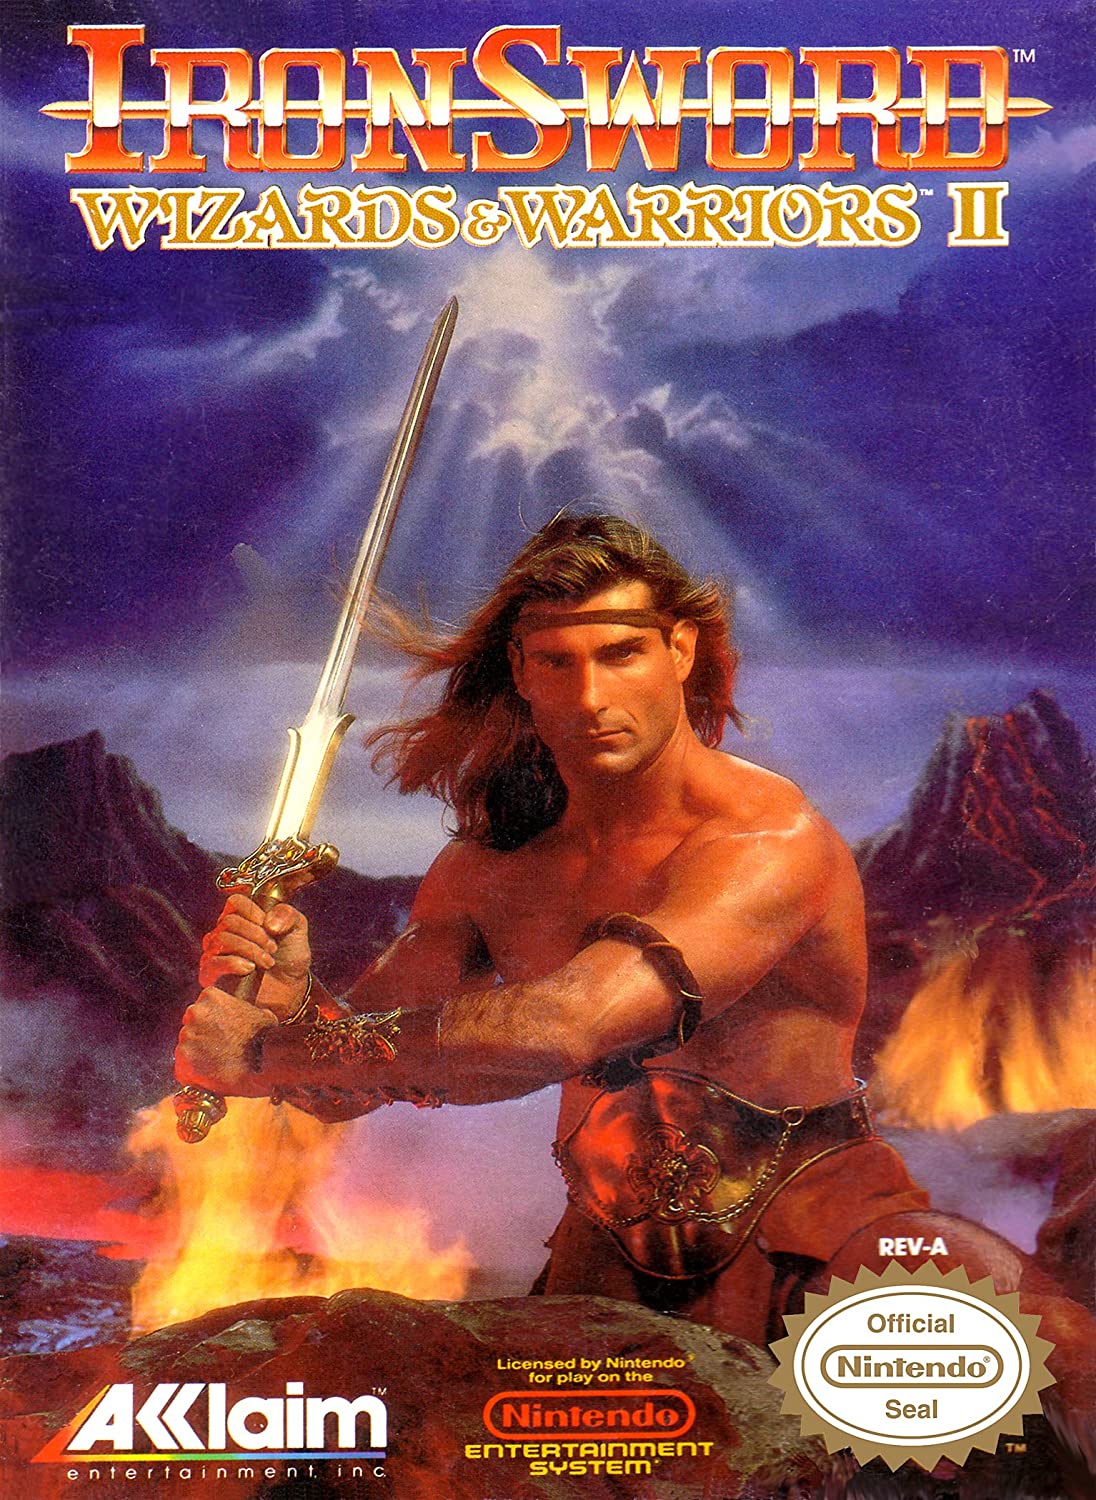 Ironsword: Wizards & Warriors II player count stats